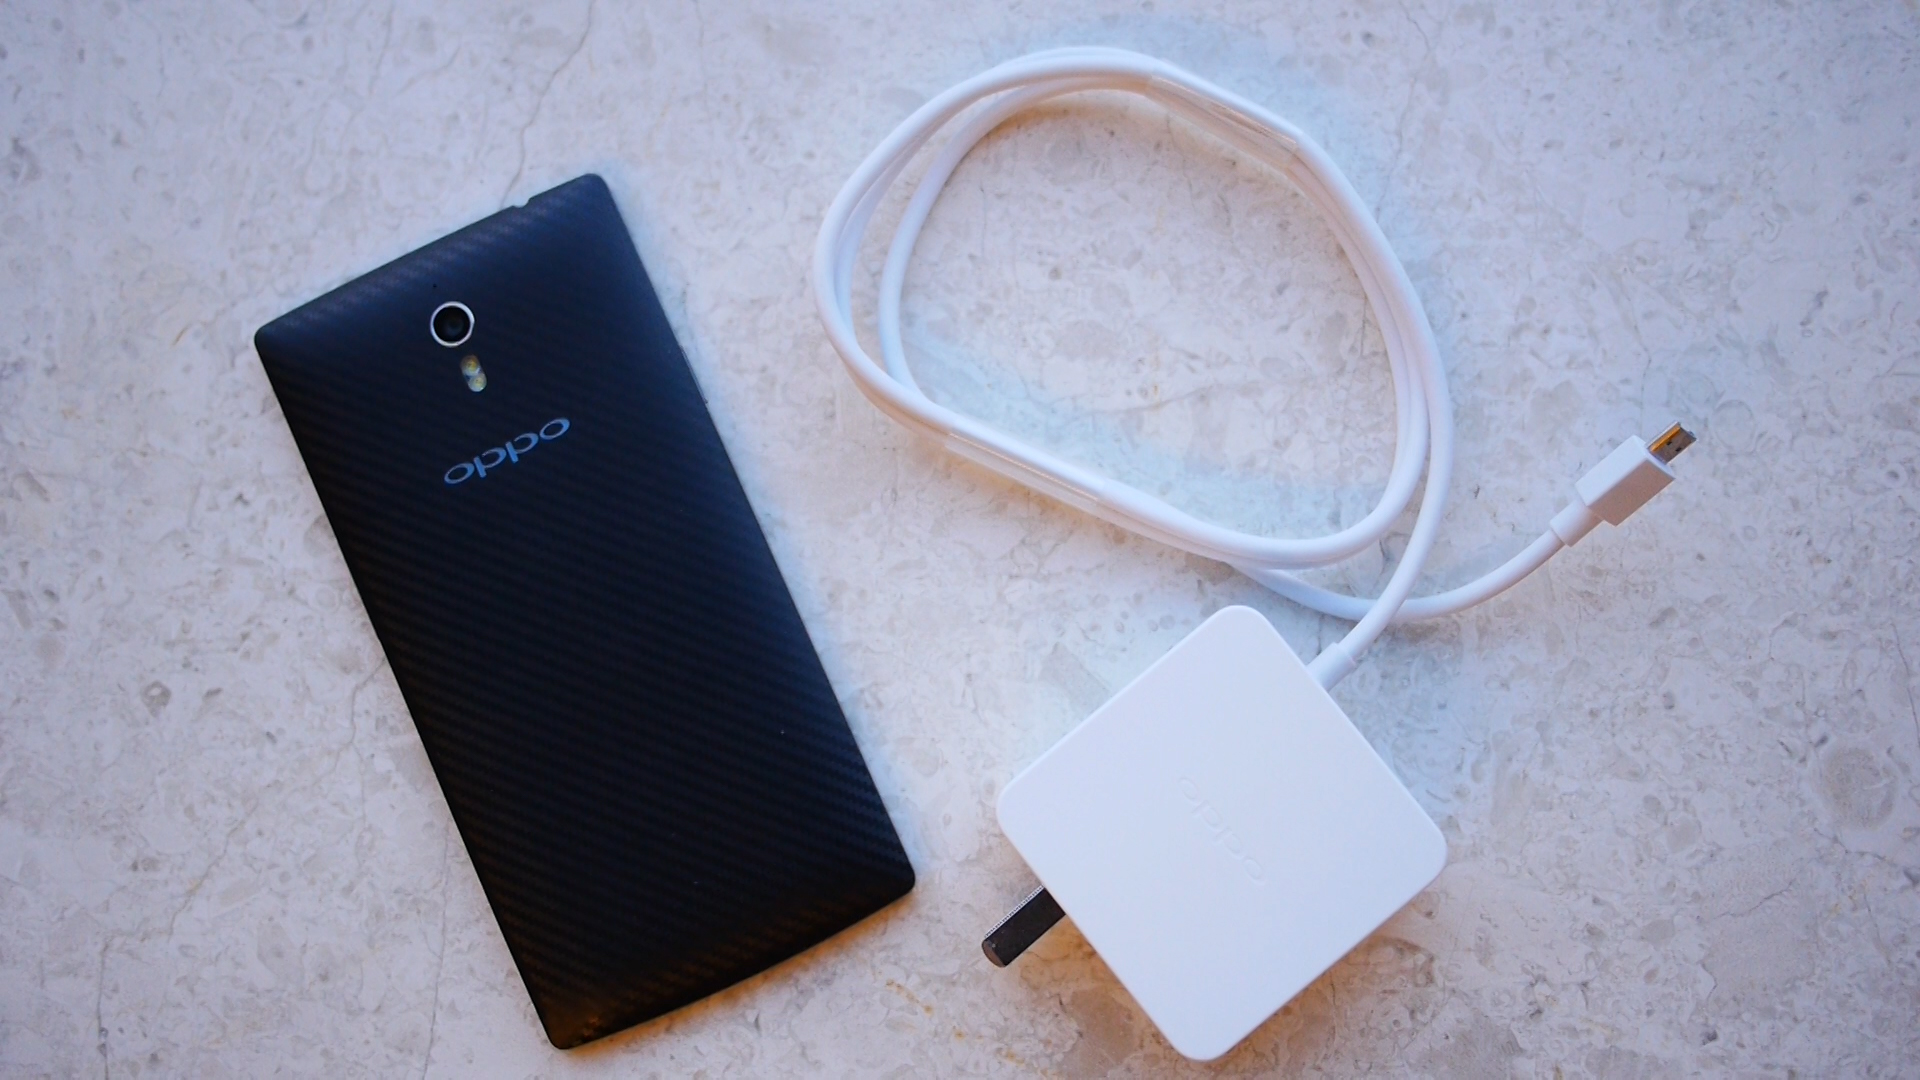 OPPO FIND 7 FAST CHARGING AA